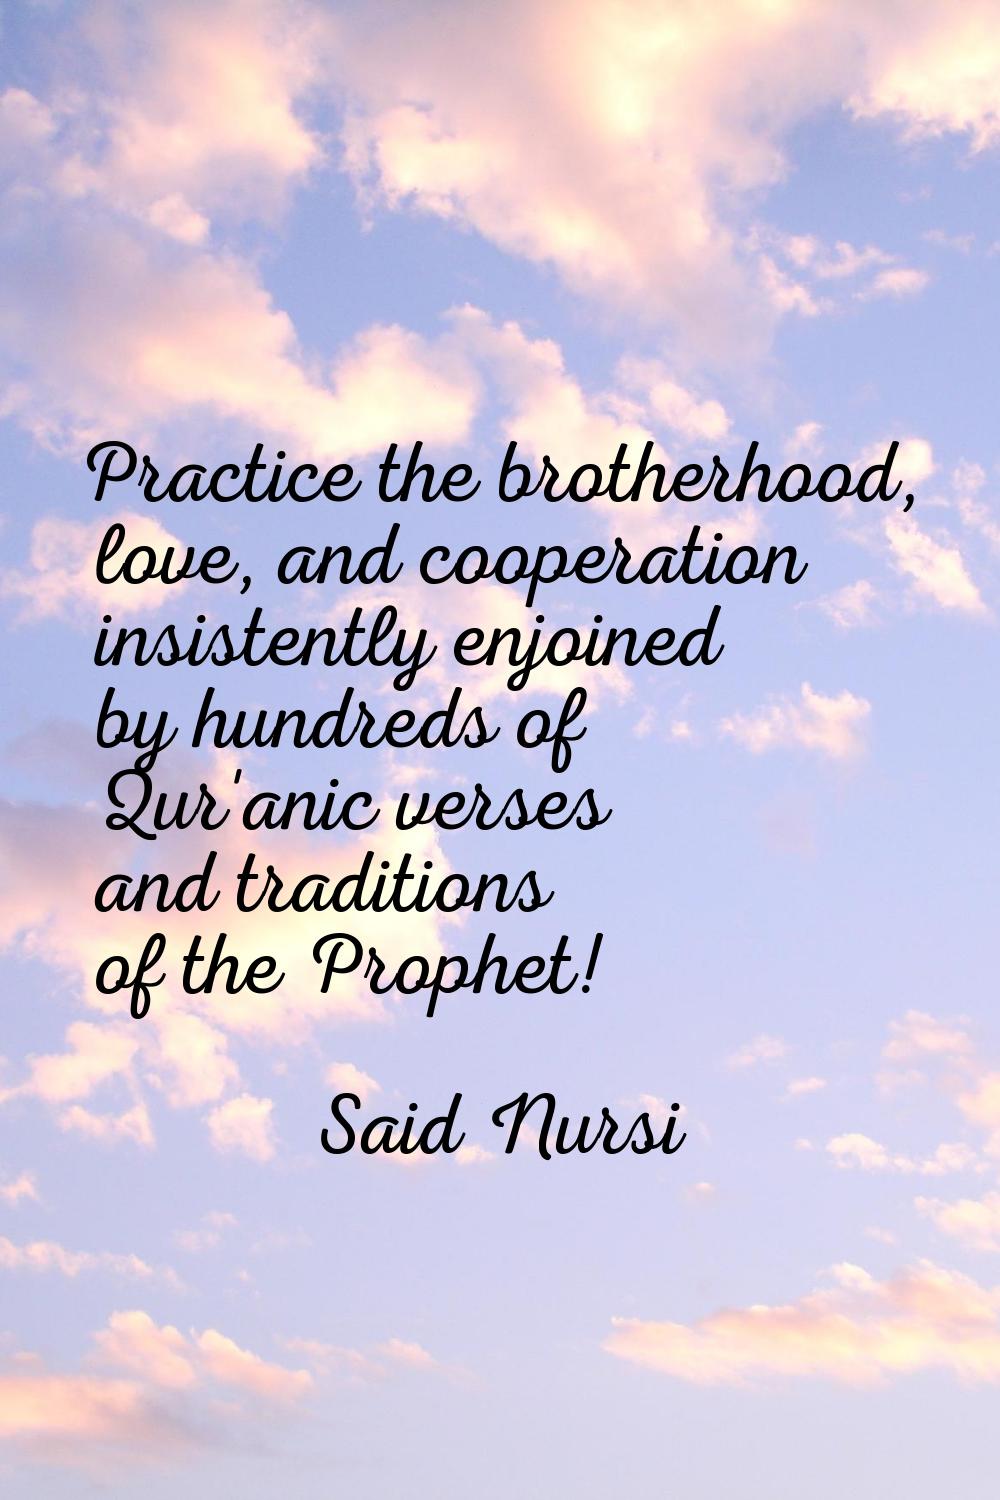 Practice the brotherhood, love, and cooperation insistently enjoined by hundreds of Qur'anic verses